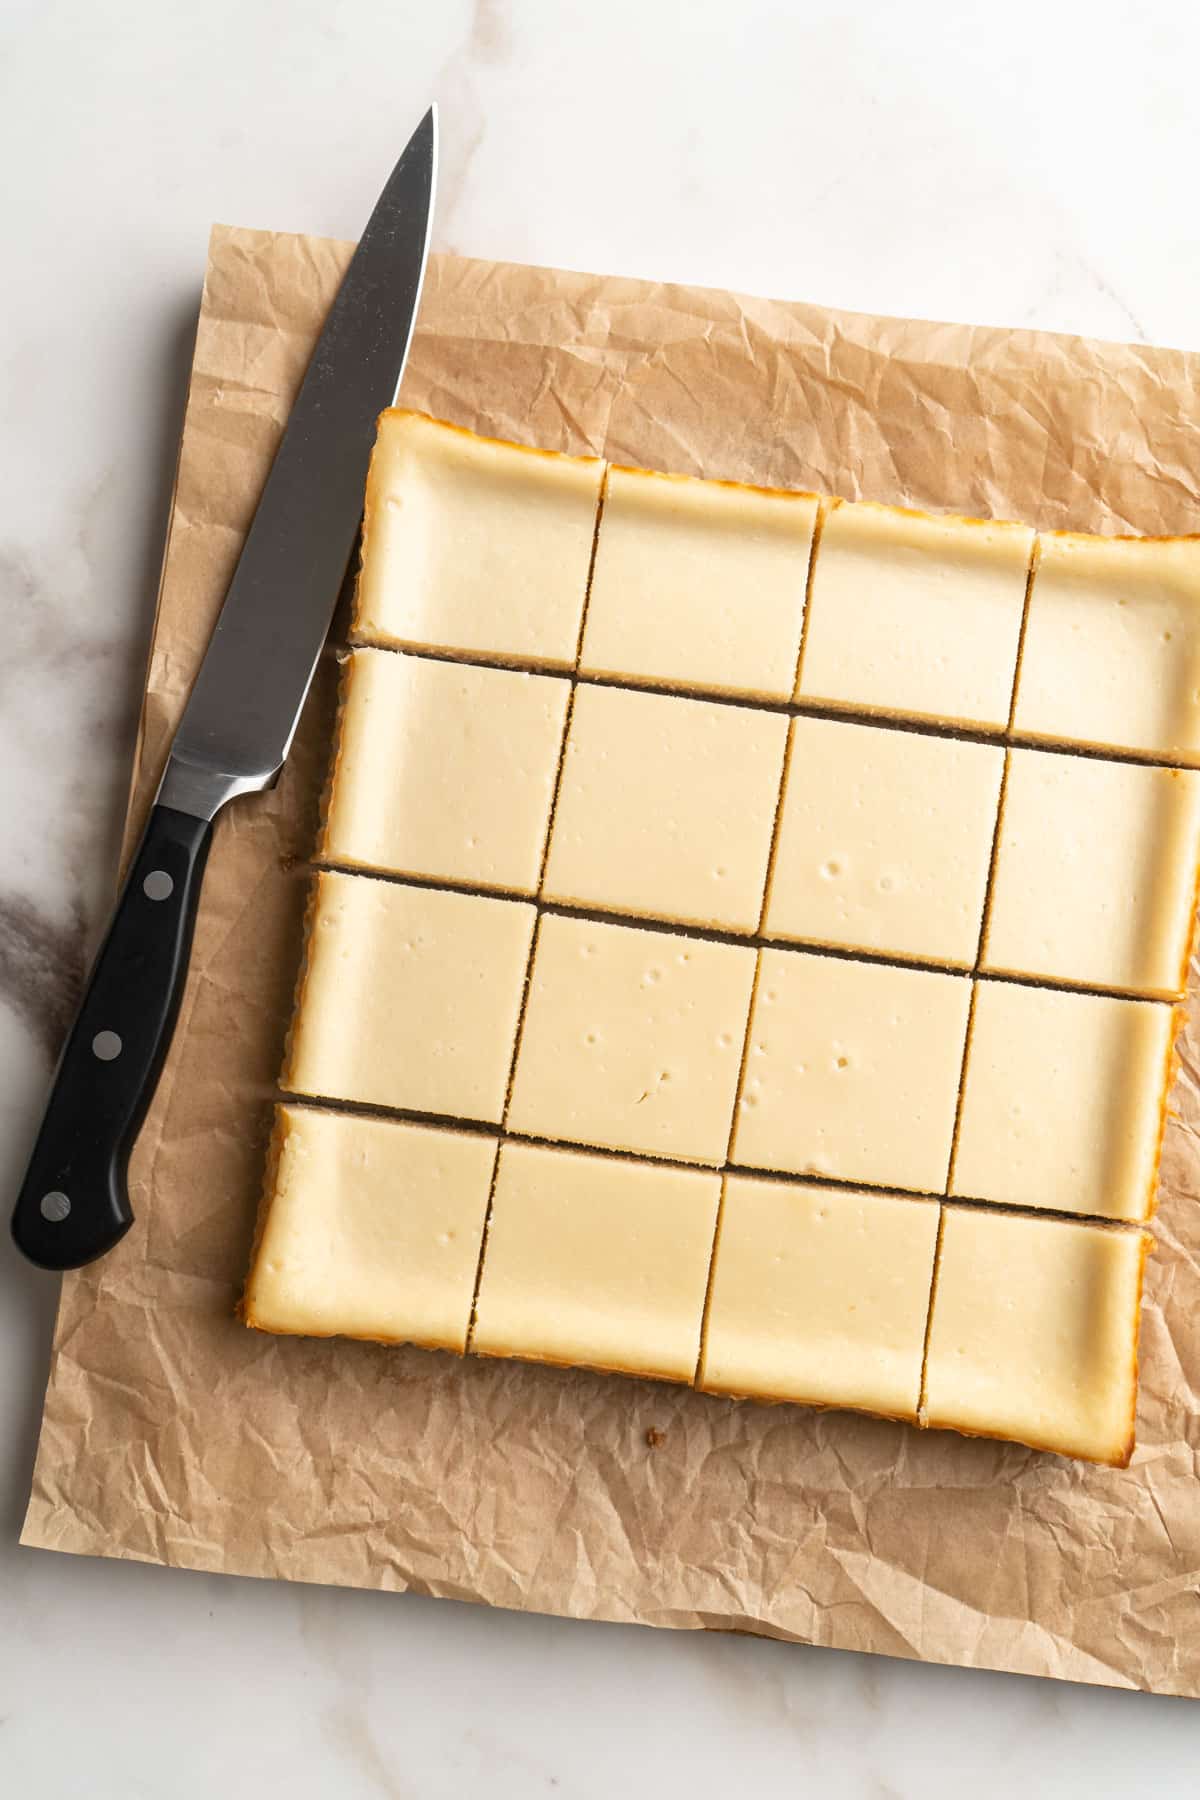 Cutting cheesecake into bars on parchment paper.